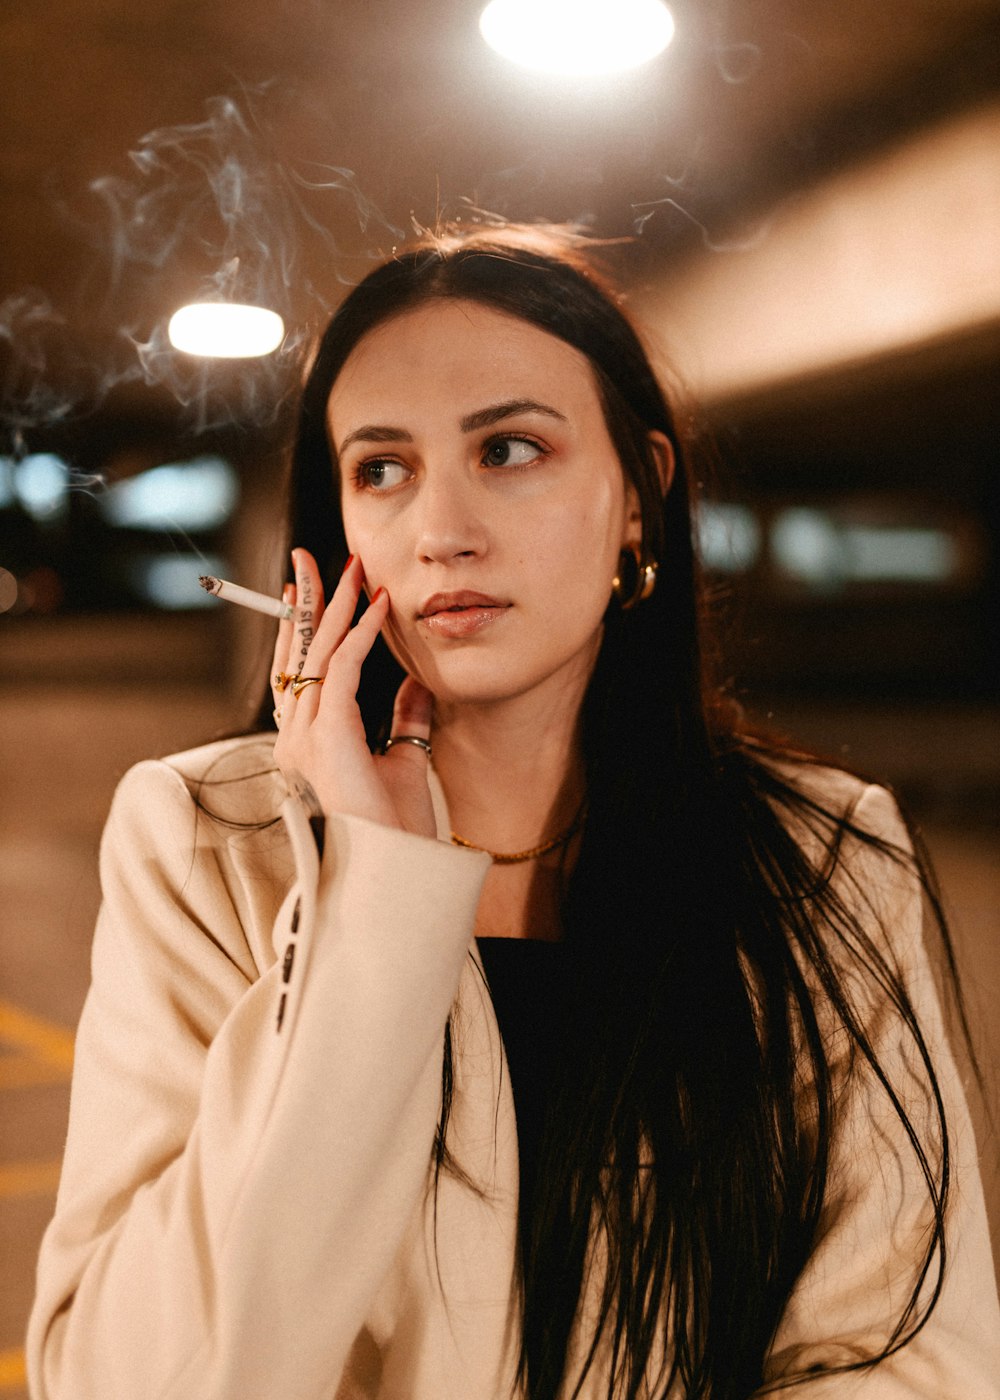 a woman smoking a cigarette in a parking lot